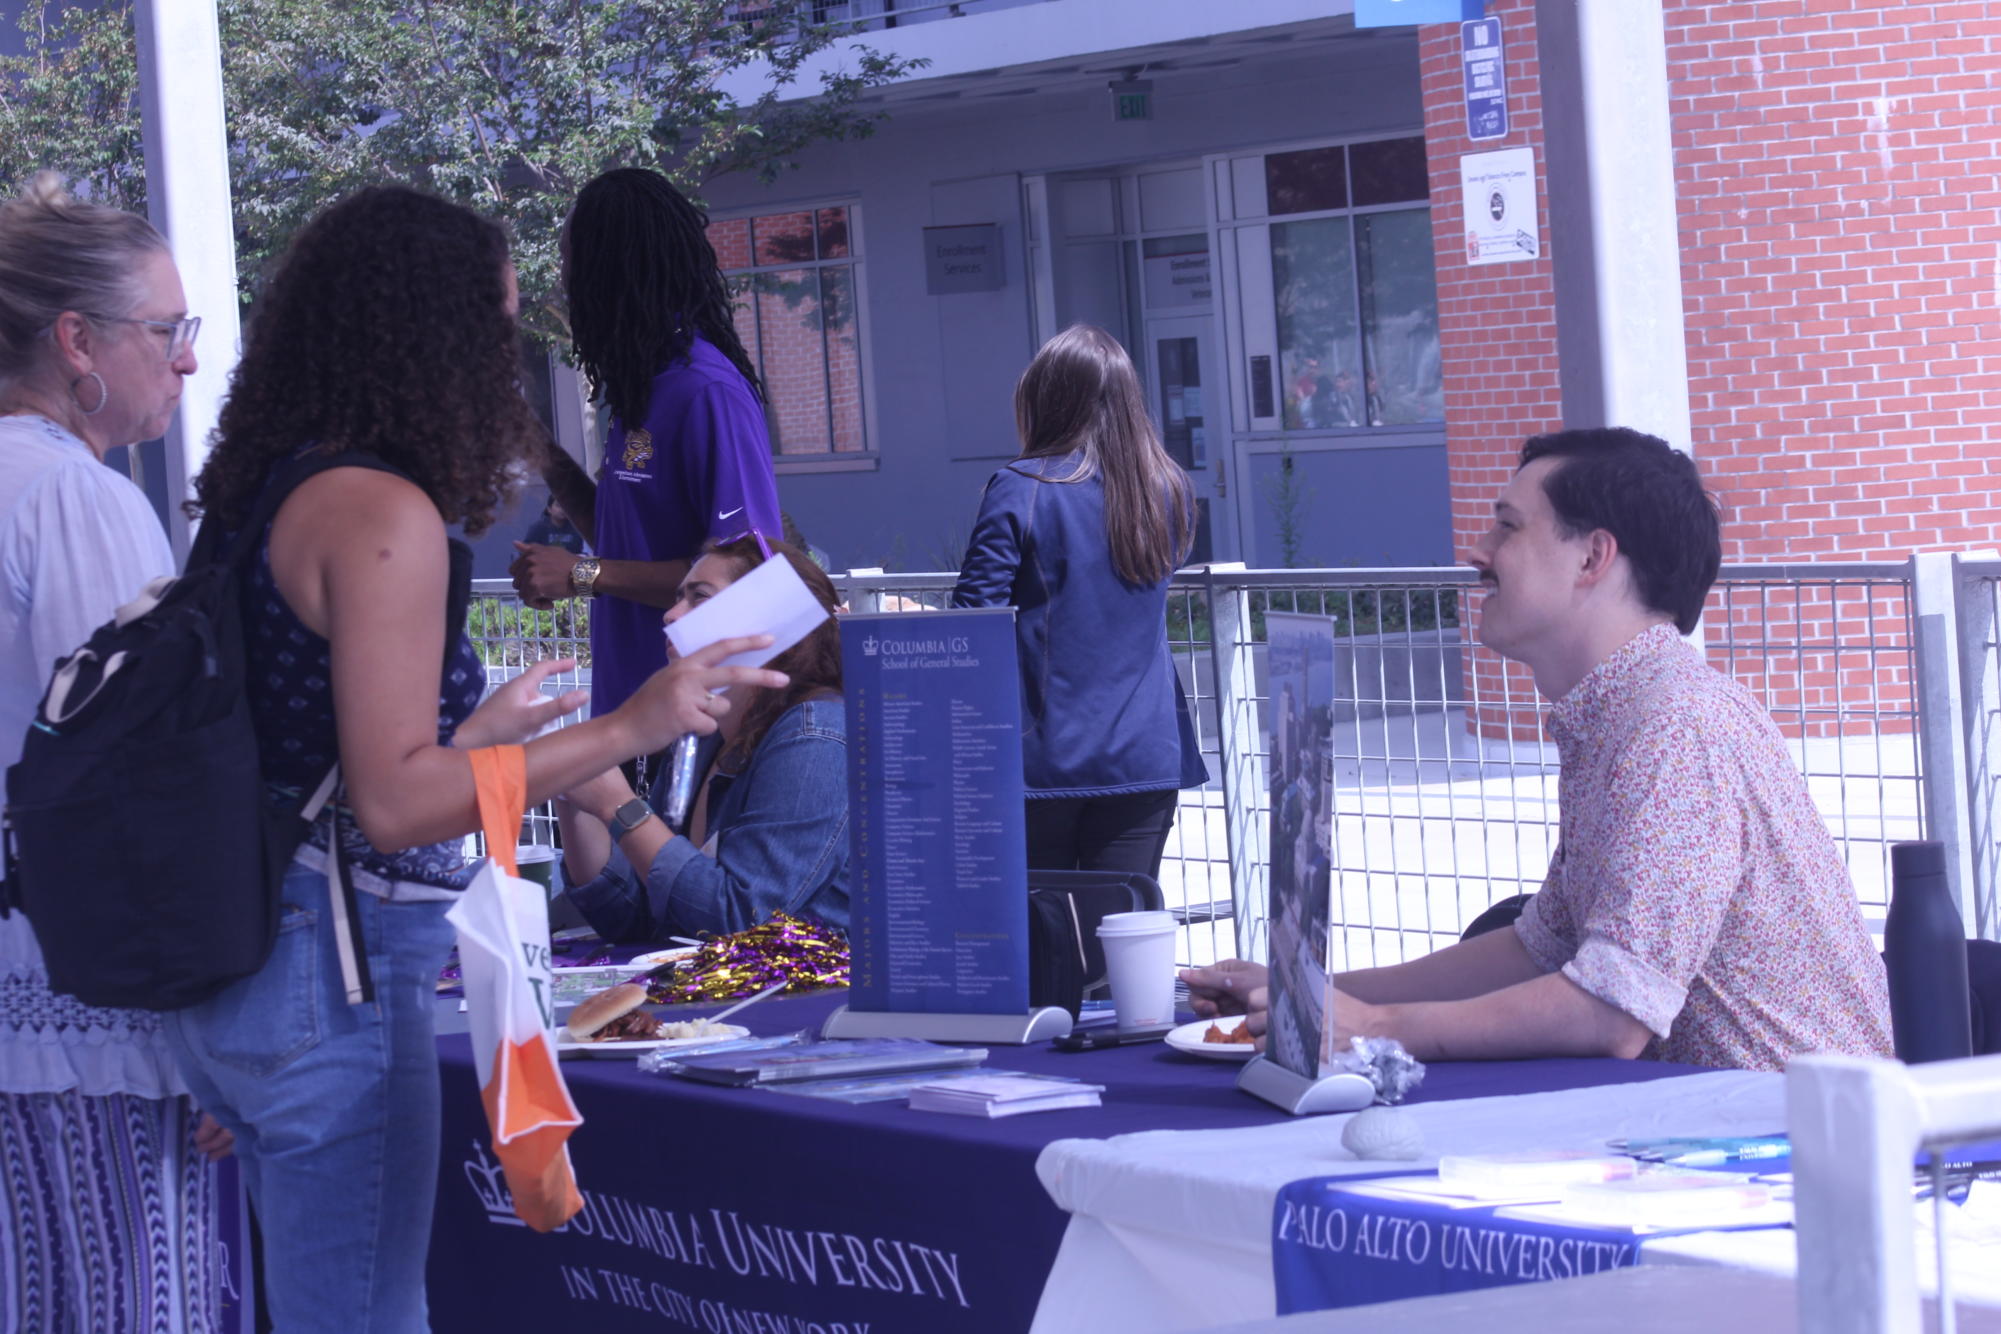 Columbia University School of General Studies representative Emmett Ingram, right, speaks to City College student Tyra Lawley, left, and Gwendolyn Kesler, far left, at the City College Transfer Fair, Oct. 17, 2023. Photo by Sean Monney/City Times Media